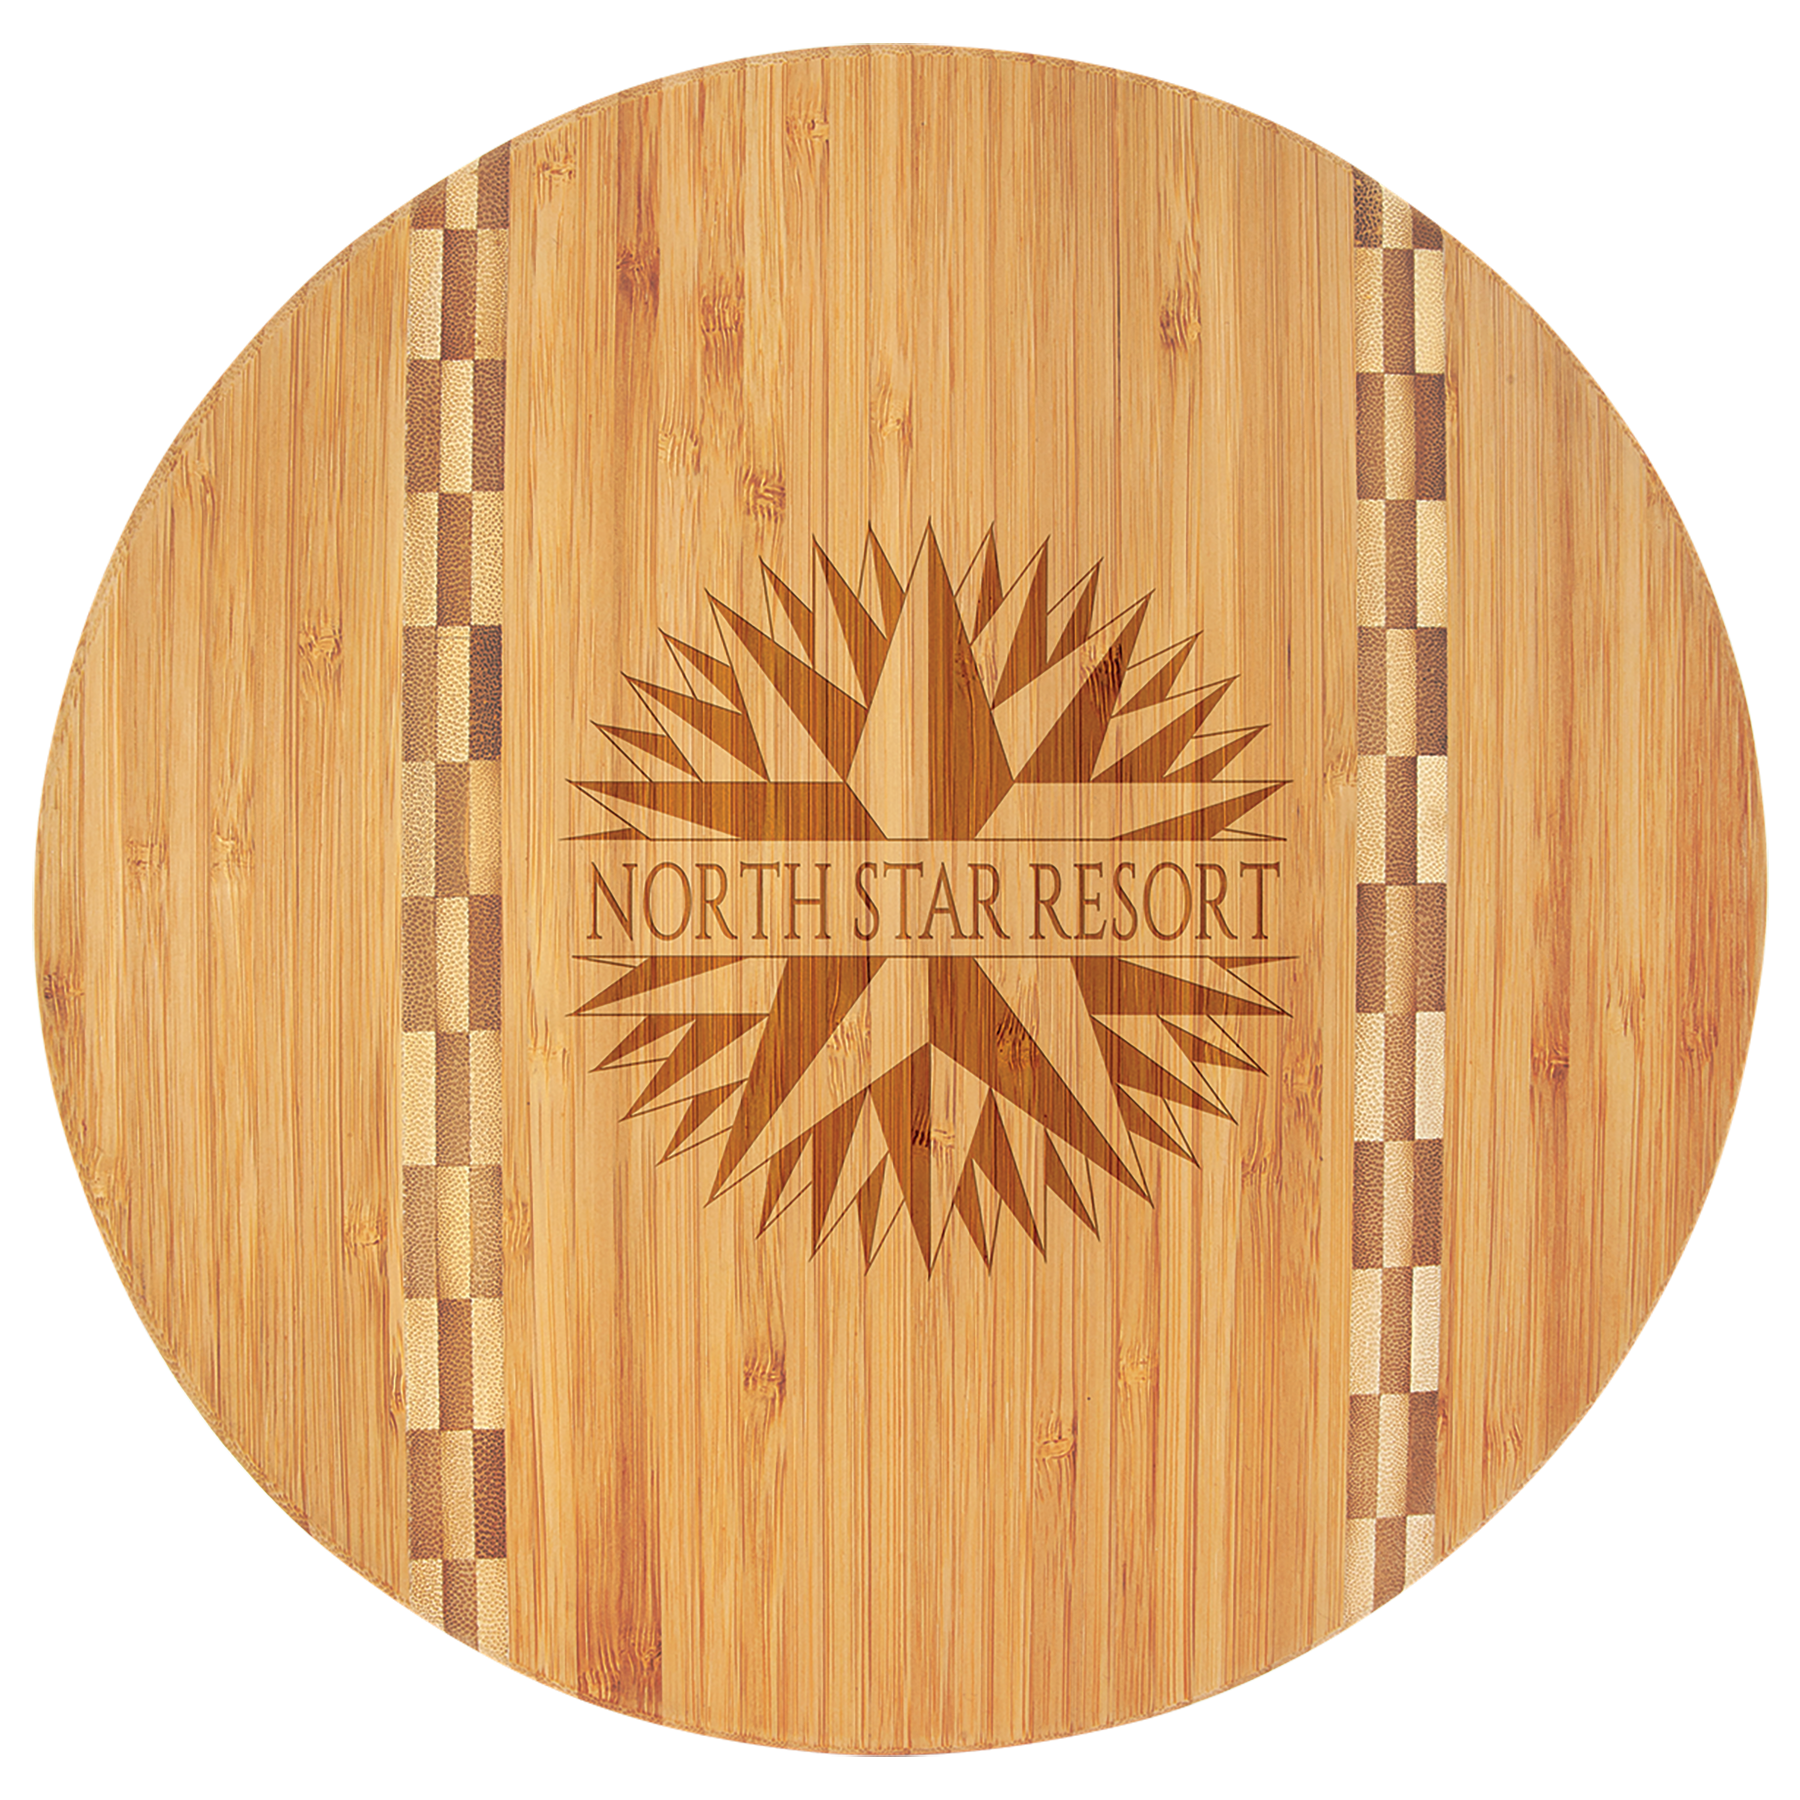 Round Bamboo Cutting Board with Butcher Block Inlay